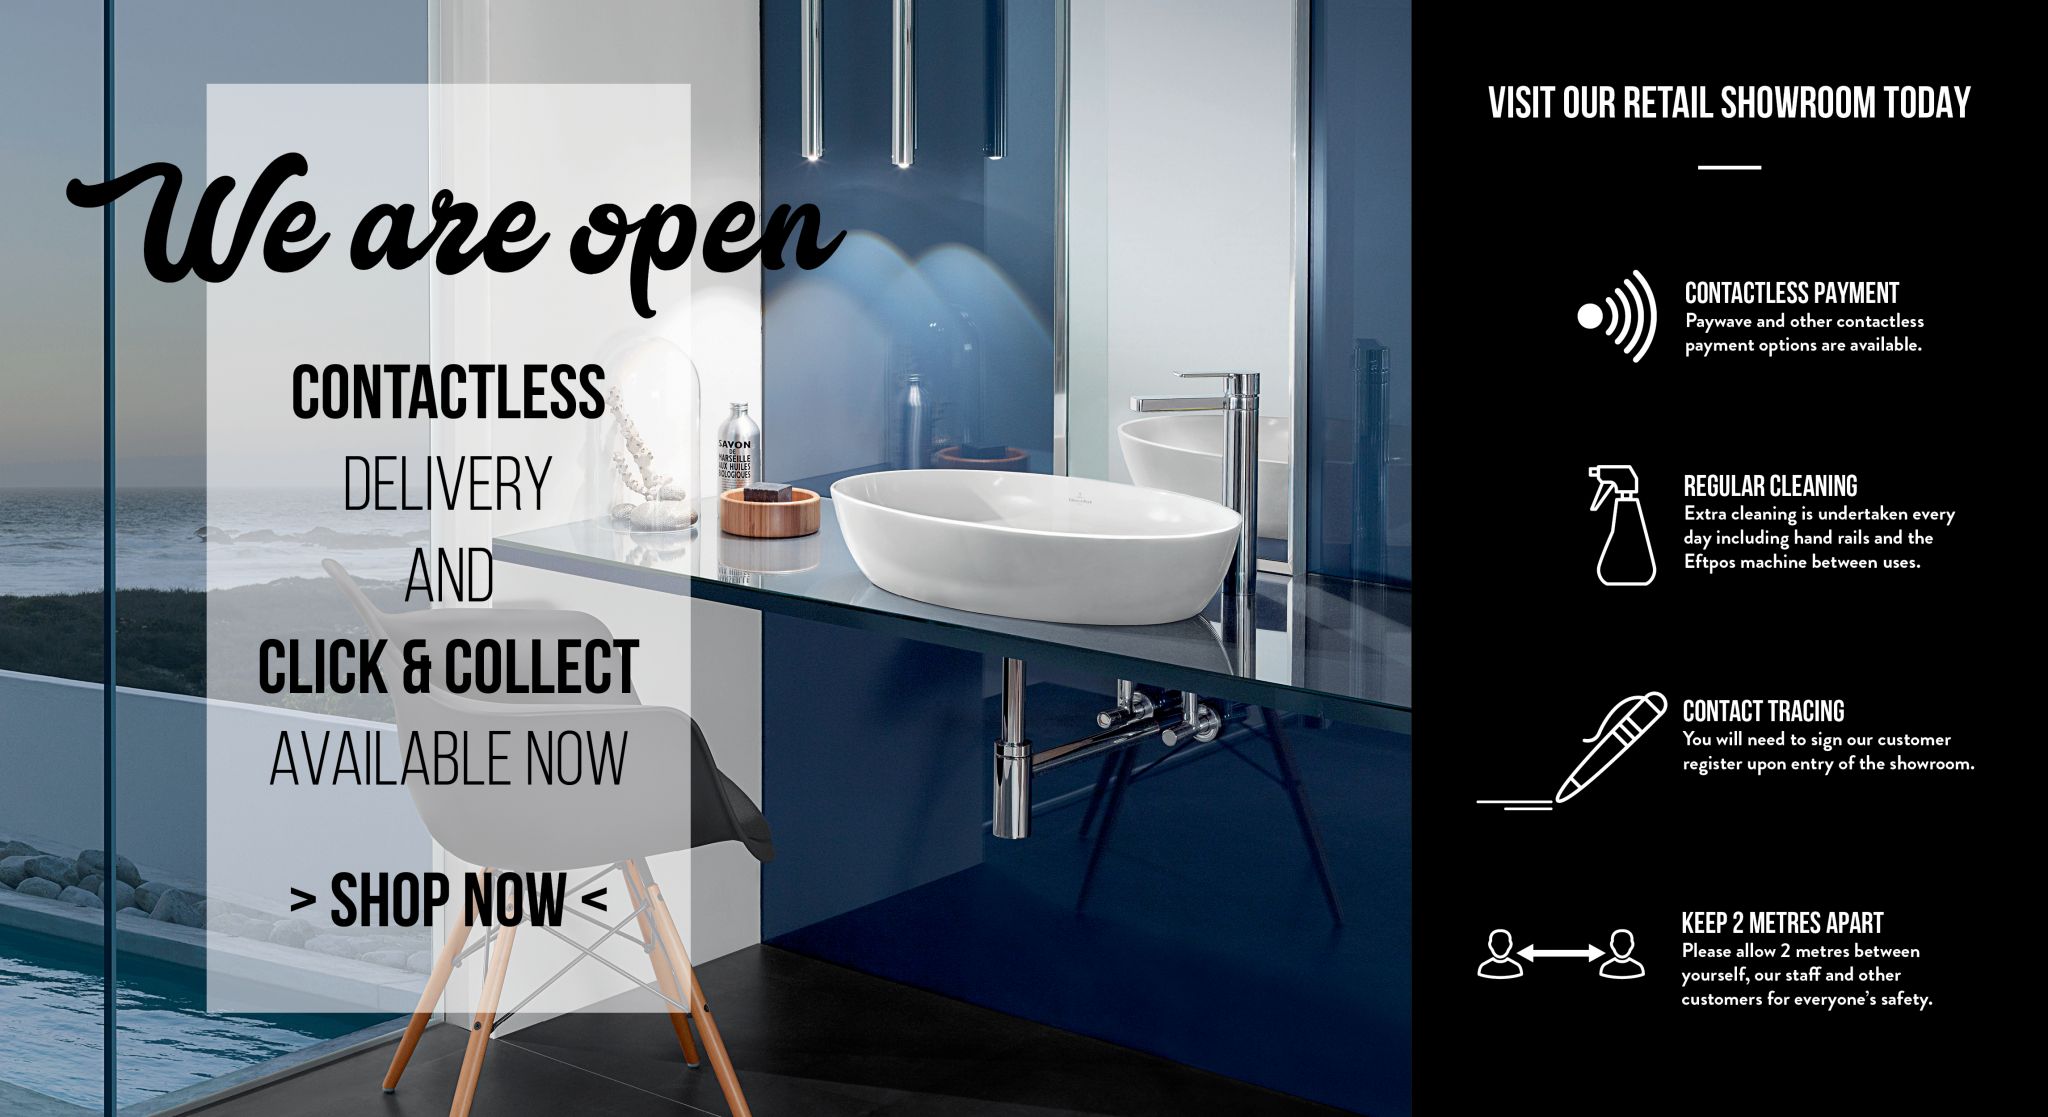 Home Suppliers Of Bathroom And Kitchen War Taps Basins Toilets Showers Baths Villeroy Boch Keuco Fima Argent And More